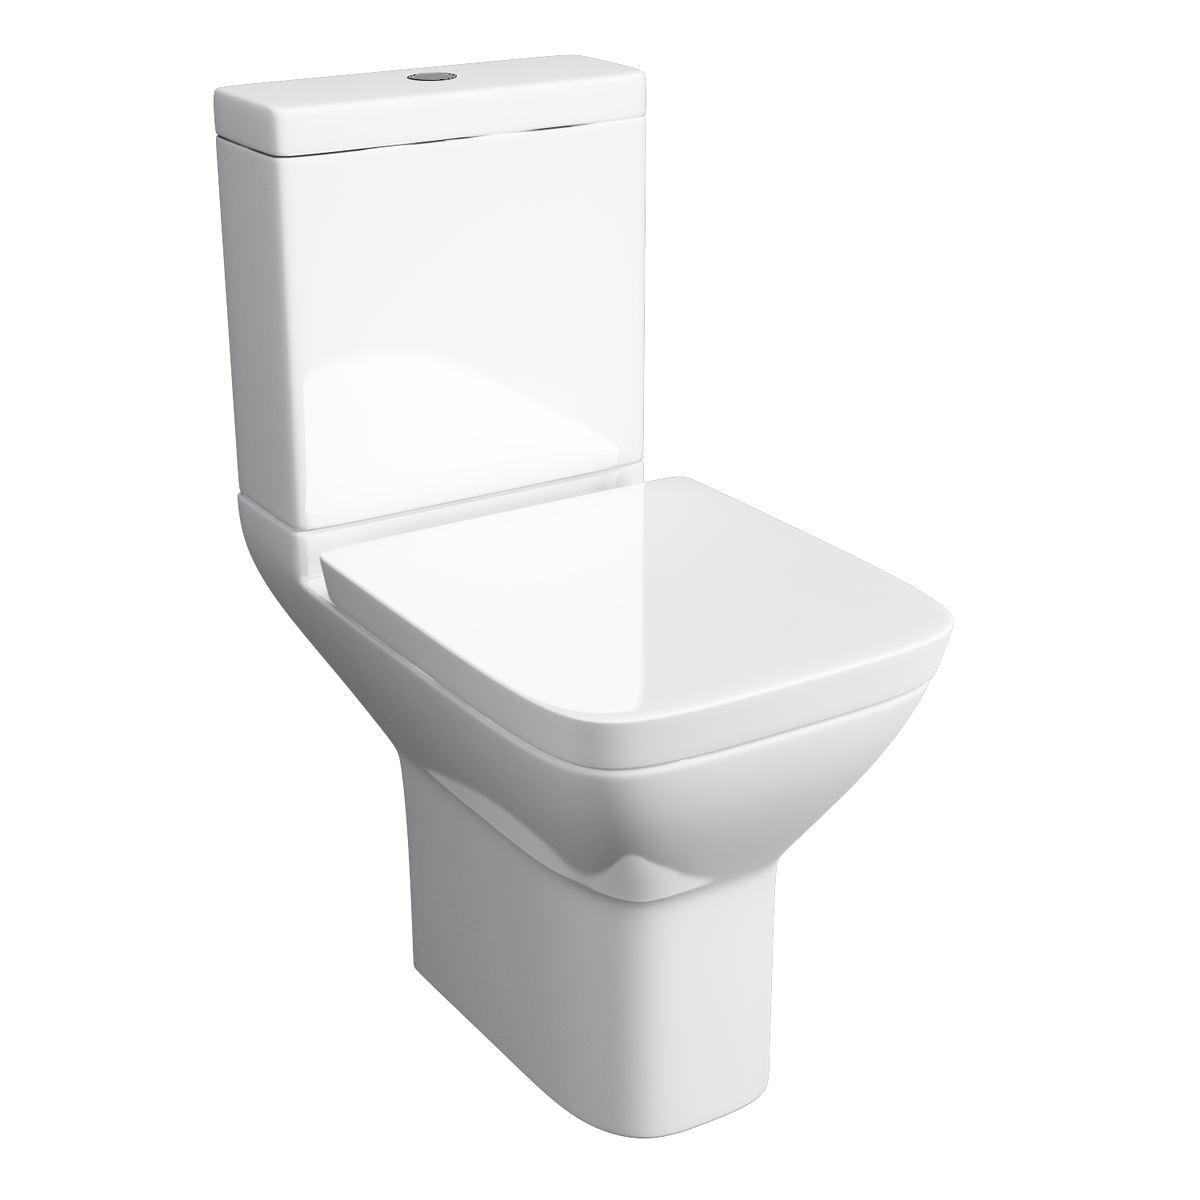 Kartell UK Project Square C/C WC Pan Set with Soft Close Seat